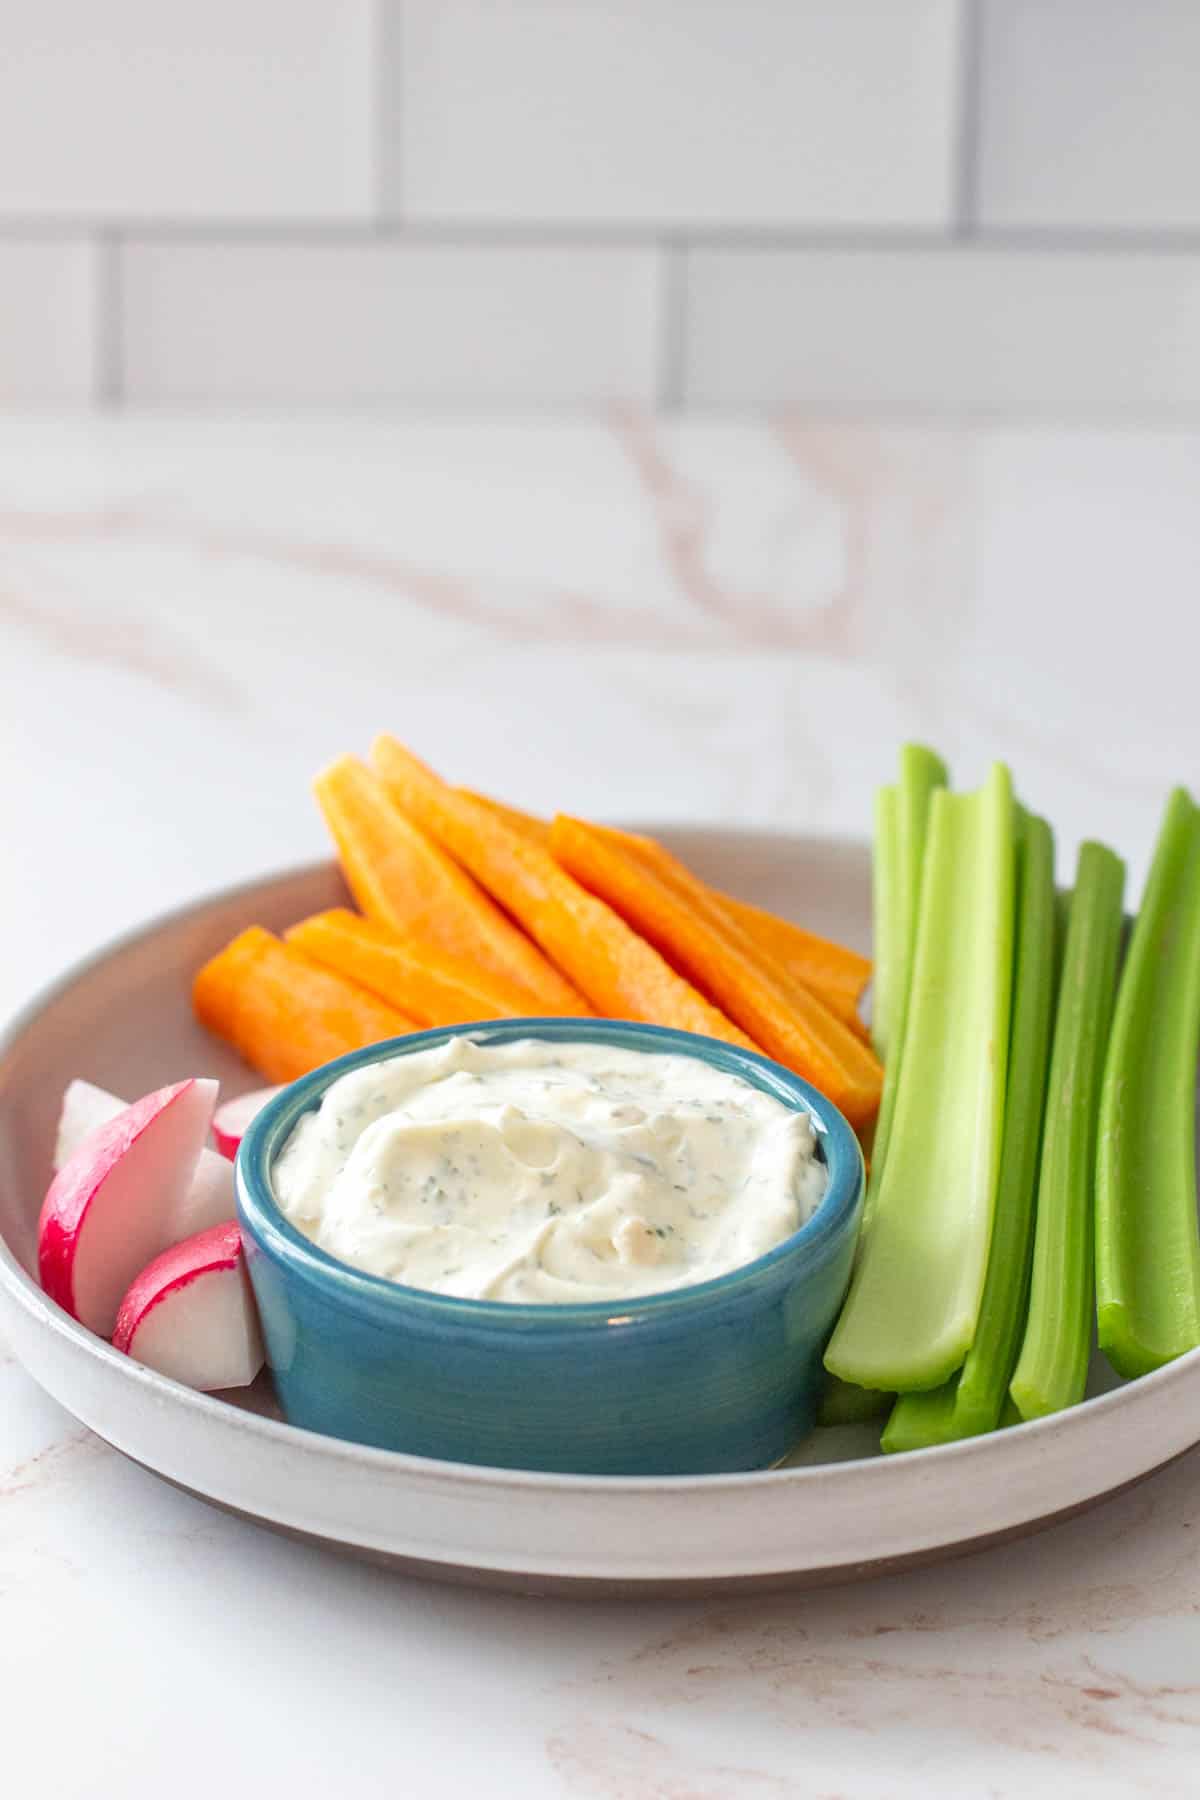 dill dip with vegetables